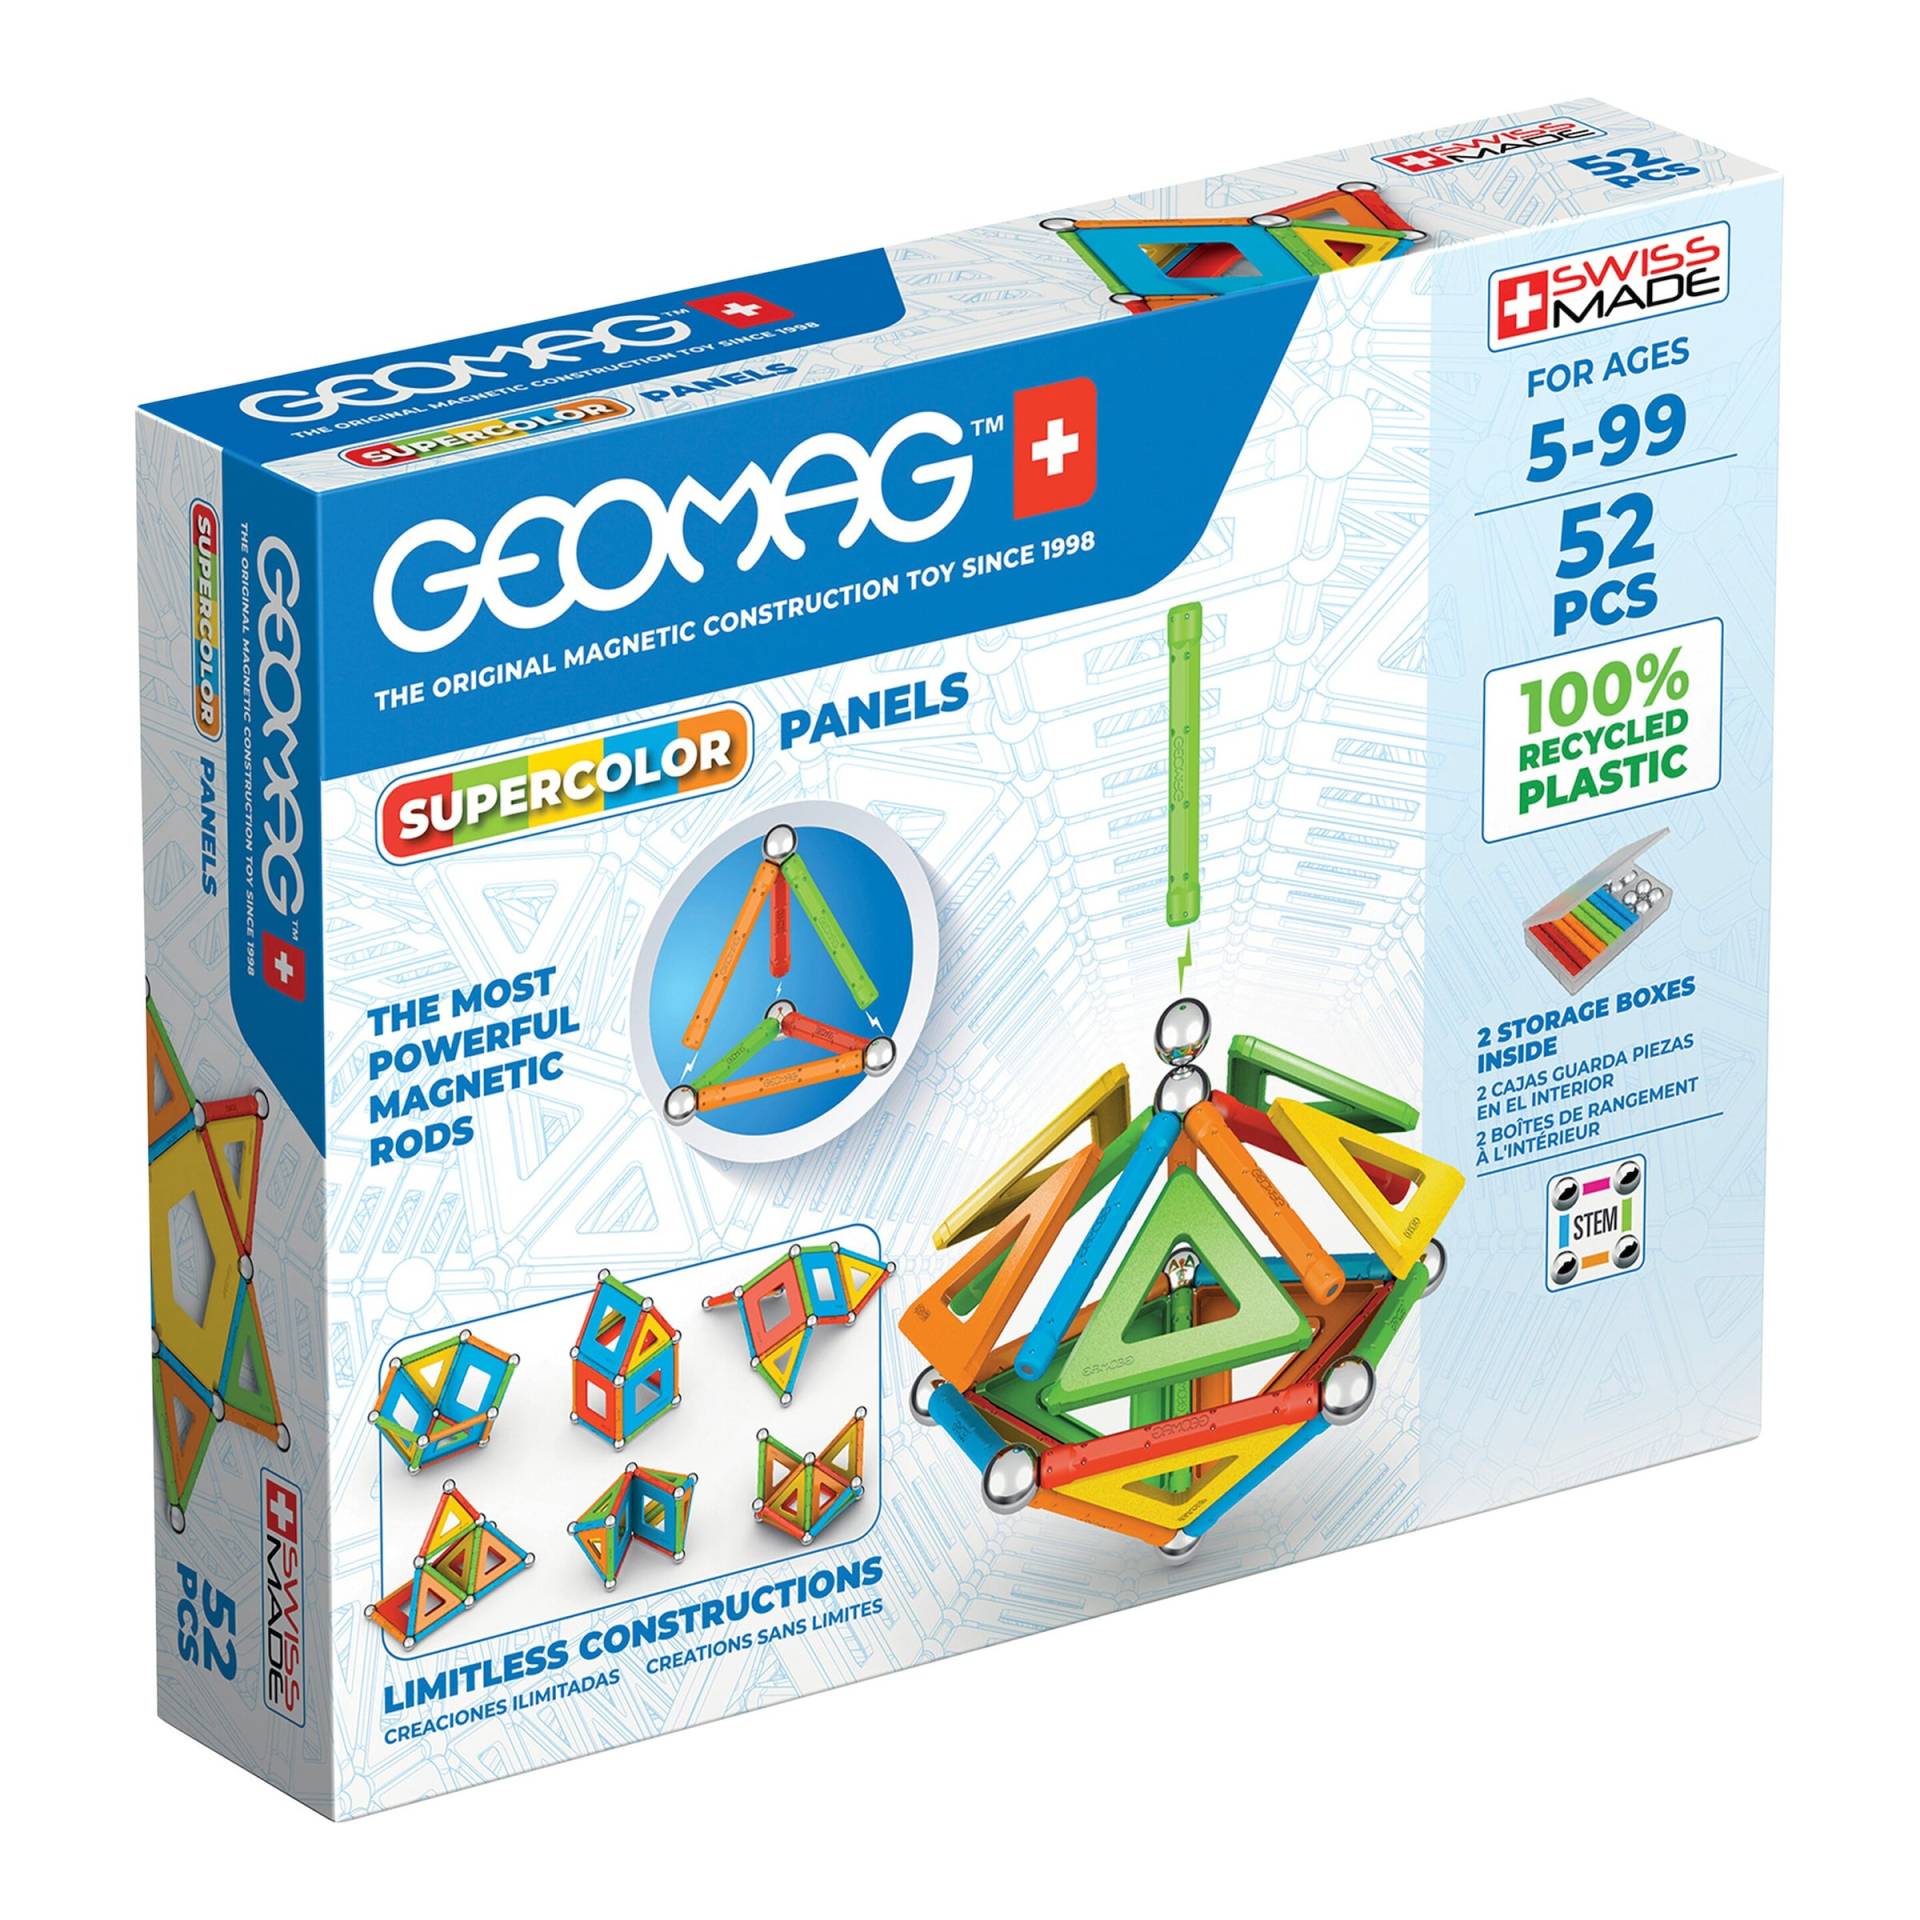 Geomag Supercolor Panels 52 Recycled von Geomag